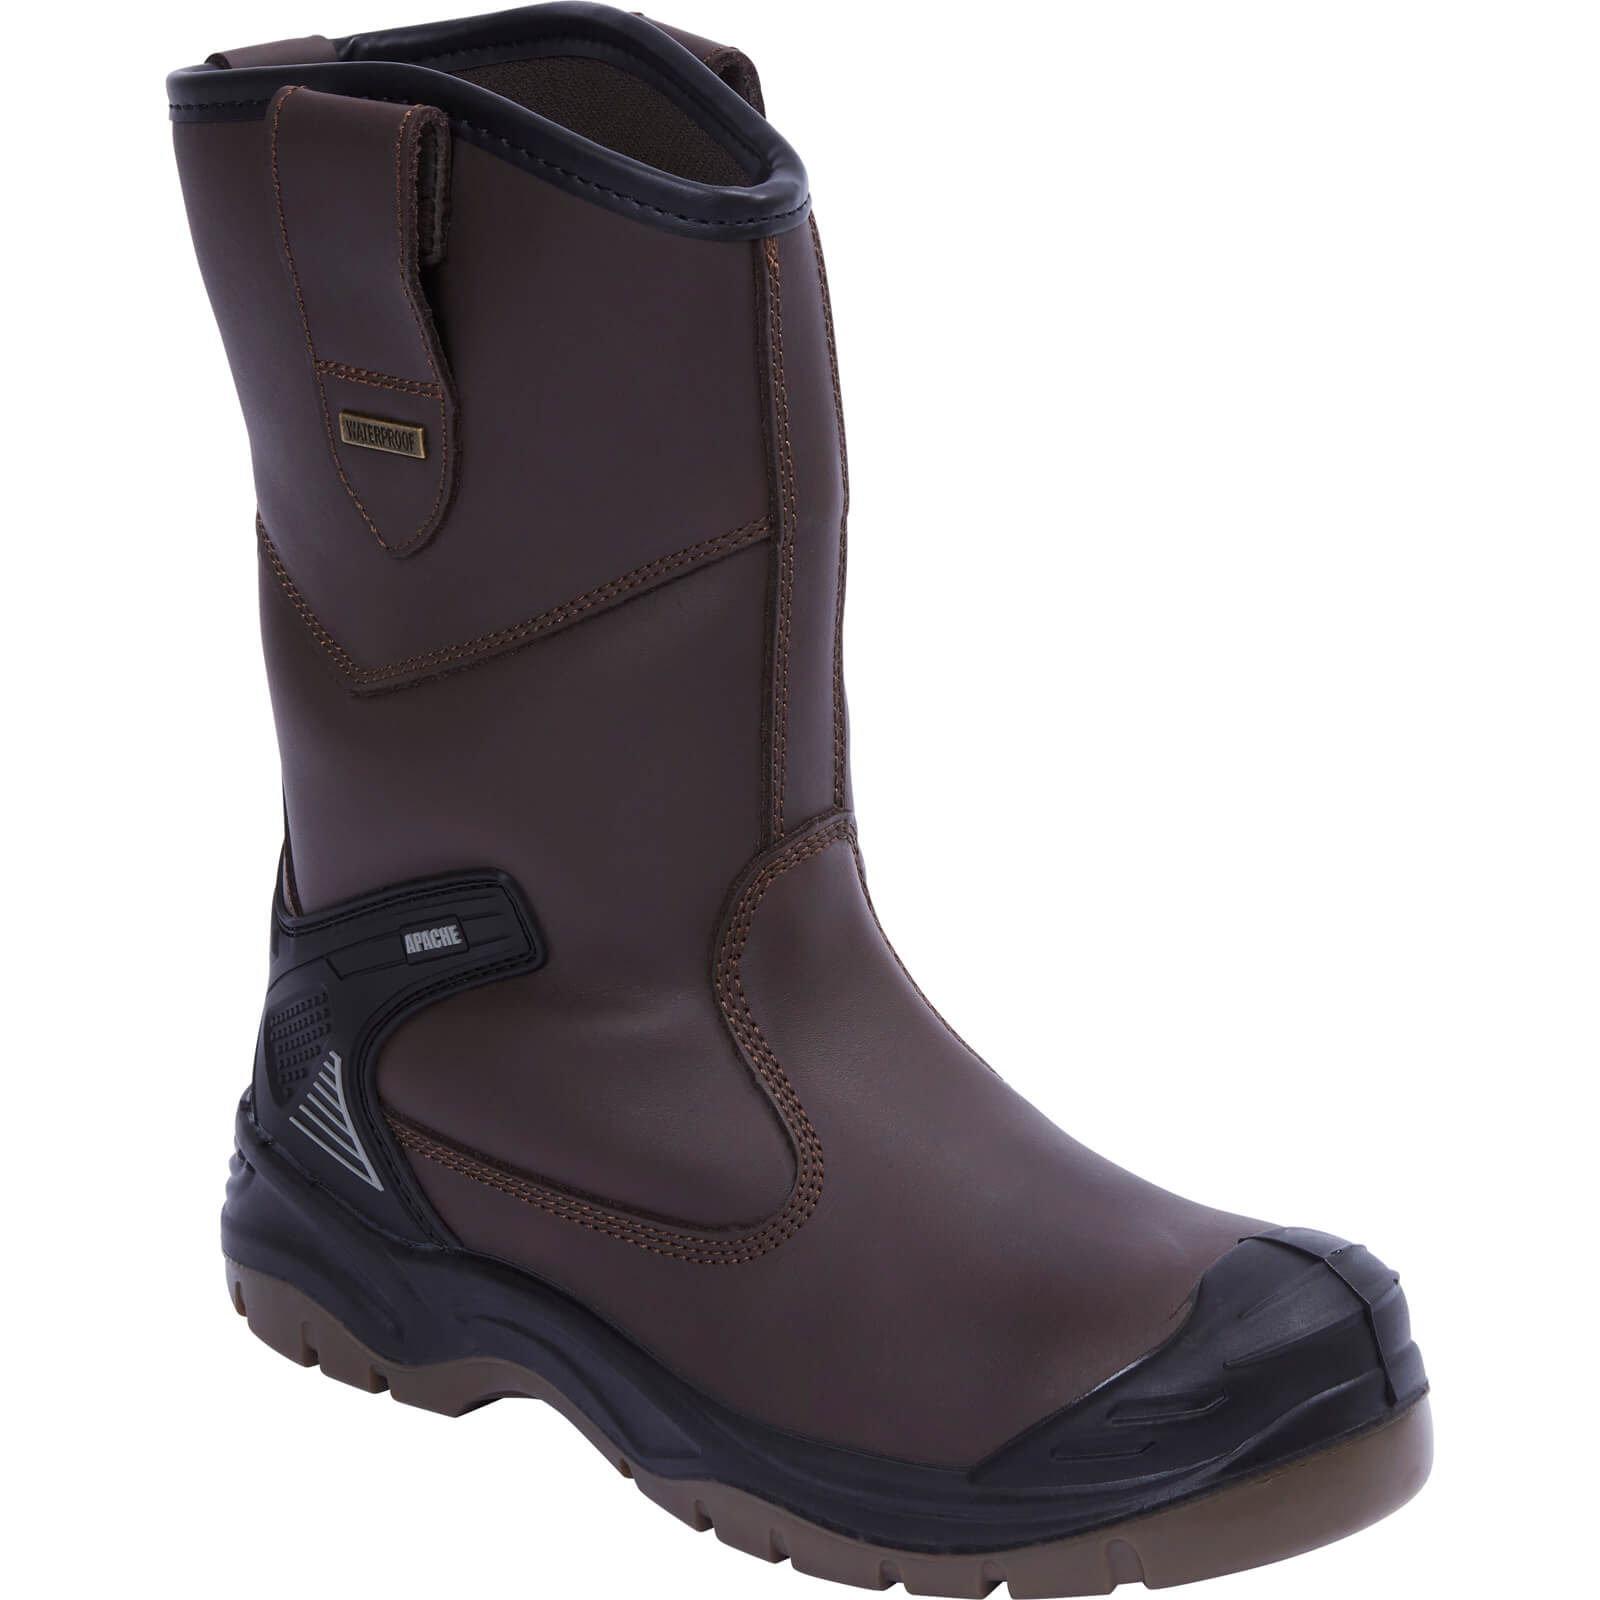 Image of Apache AP305 Waterproof Safety Rigger Boots Brown Size 9